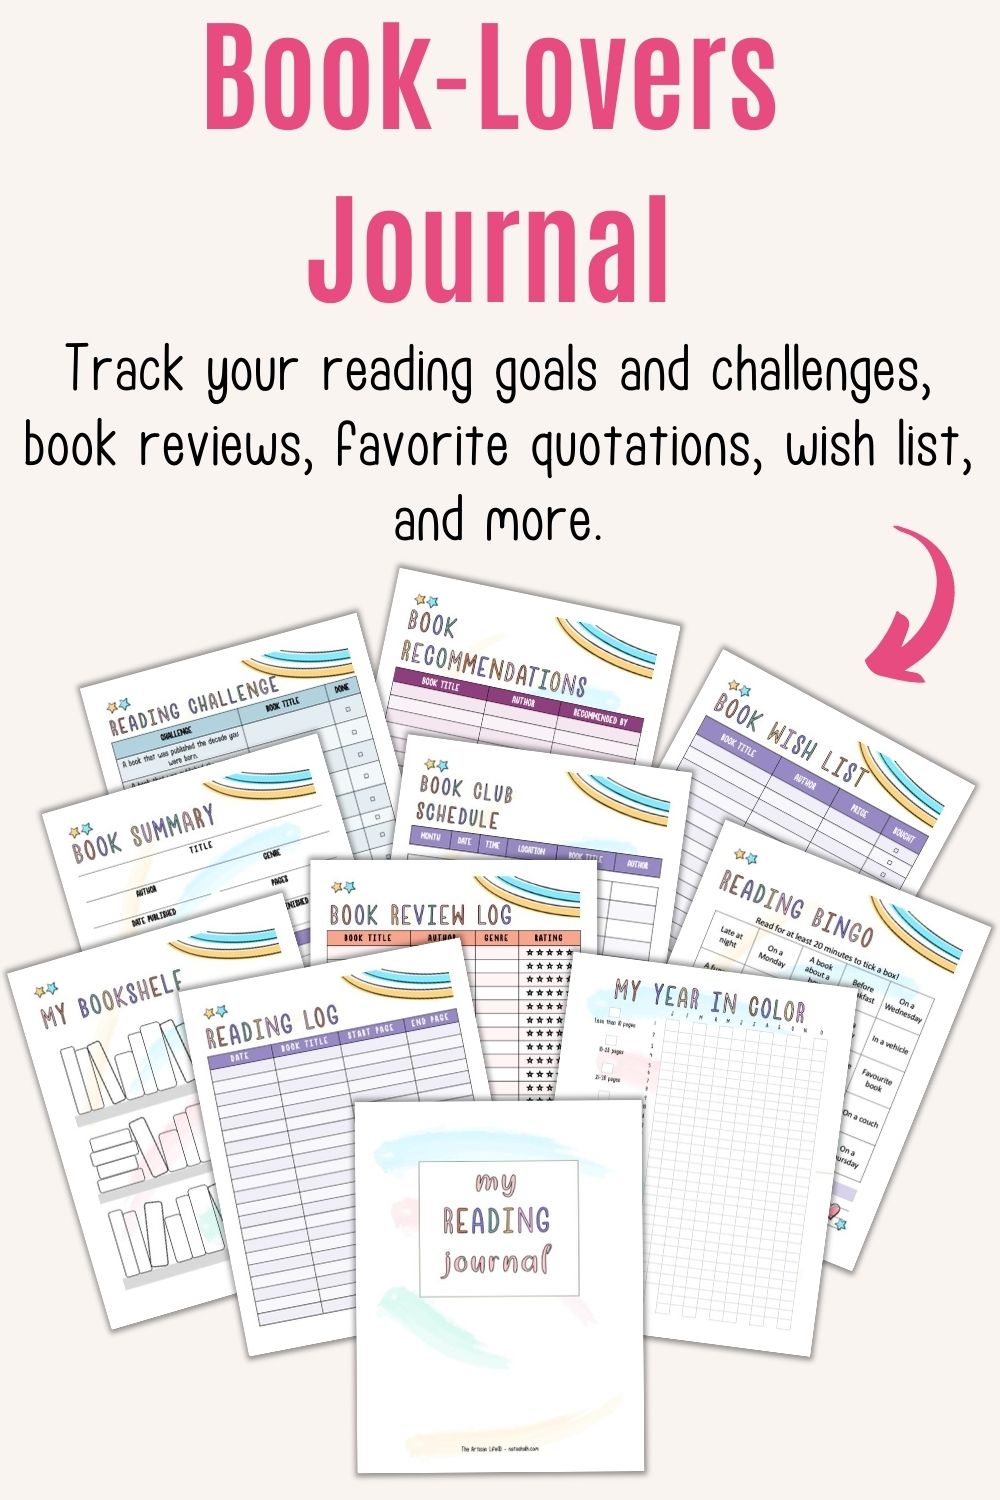 Text "book-lovers journal to track your reading goals and challenges, book reviews, favorite quotations, wish list, and more" above a preview of a printable reading journal with pastel rainbow colors